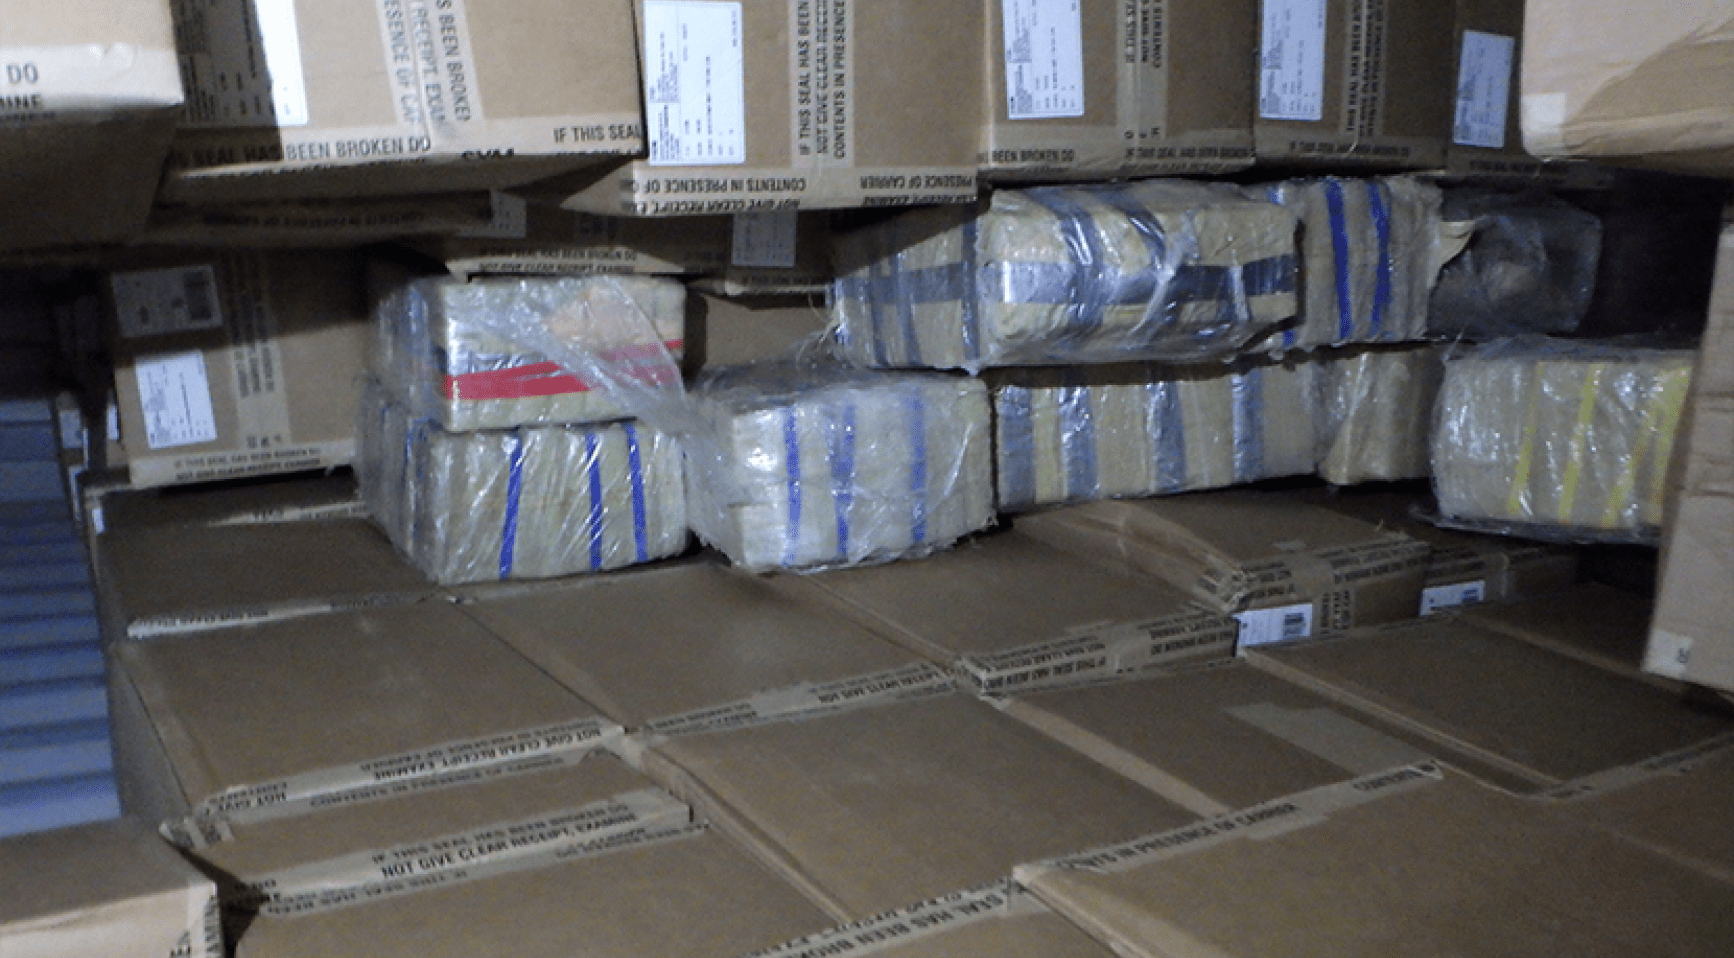 1100 kilos of cocaine was found in the container that came from Turkey to the Netherlands